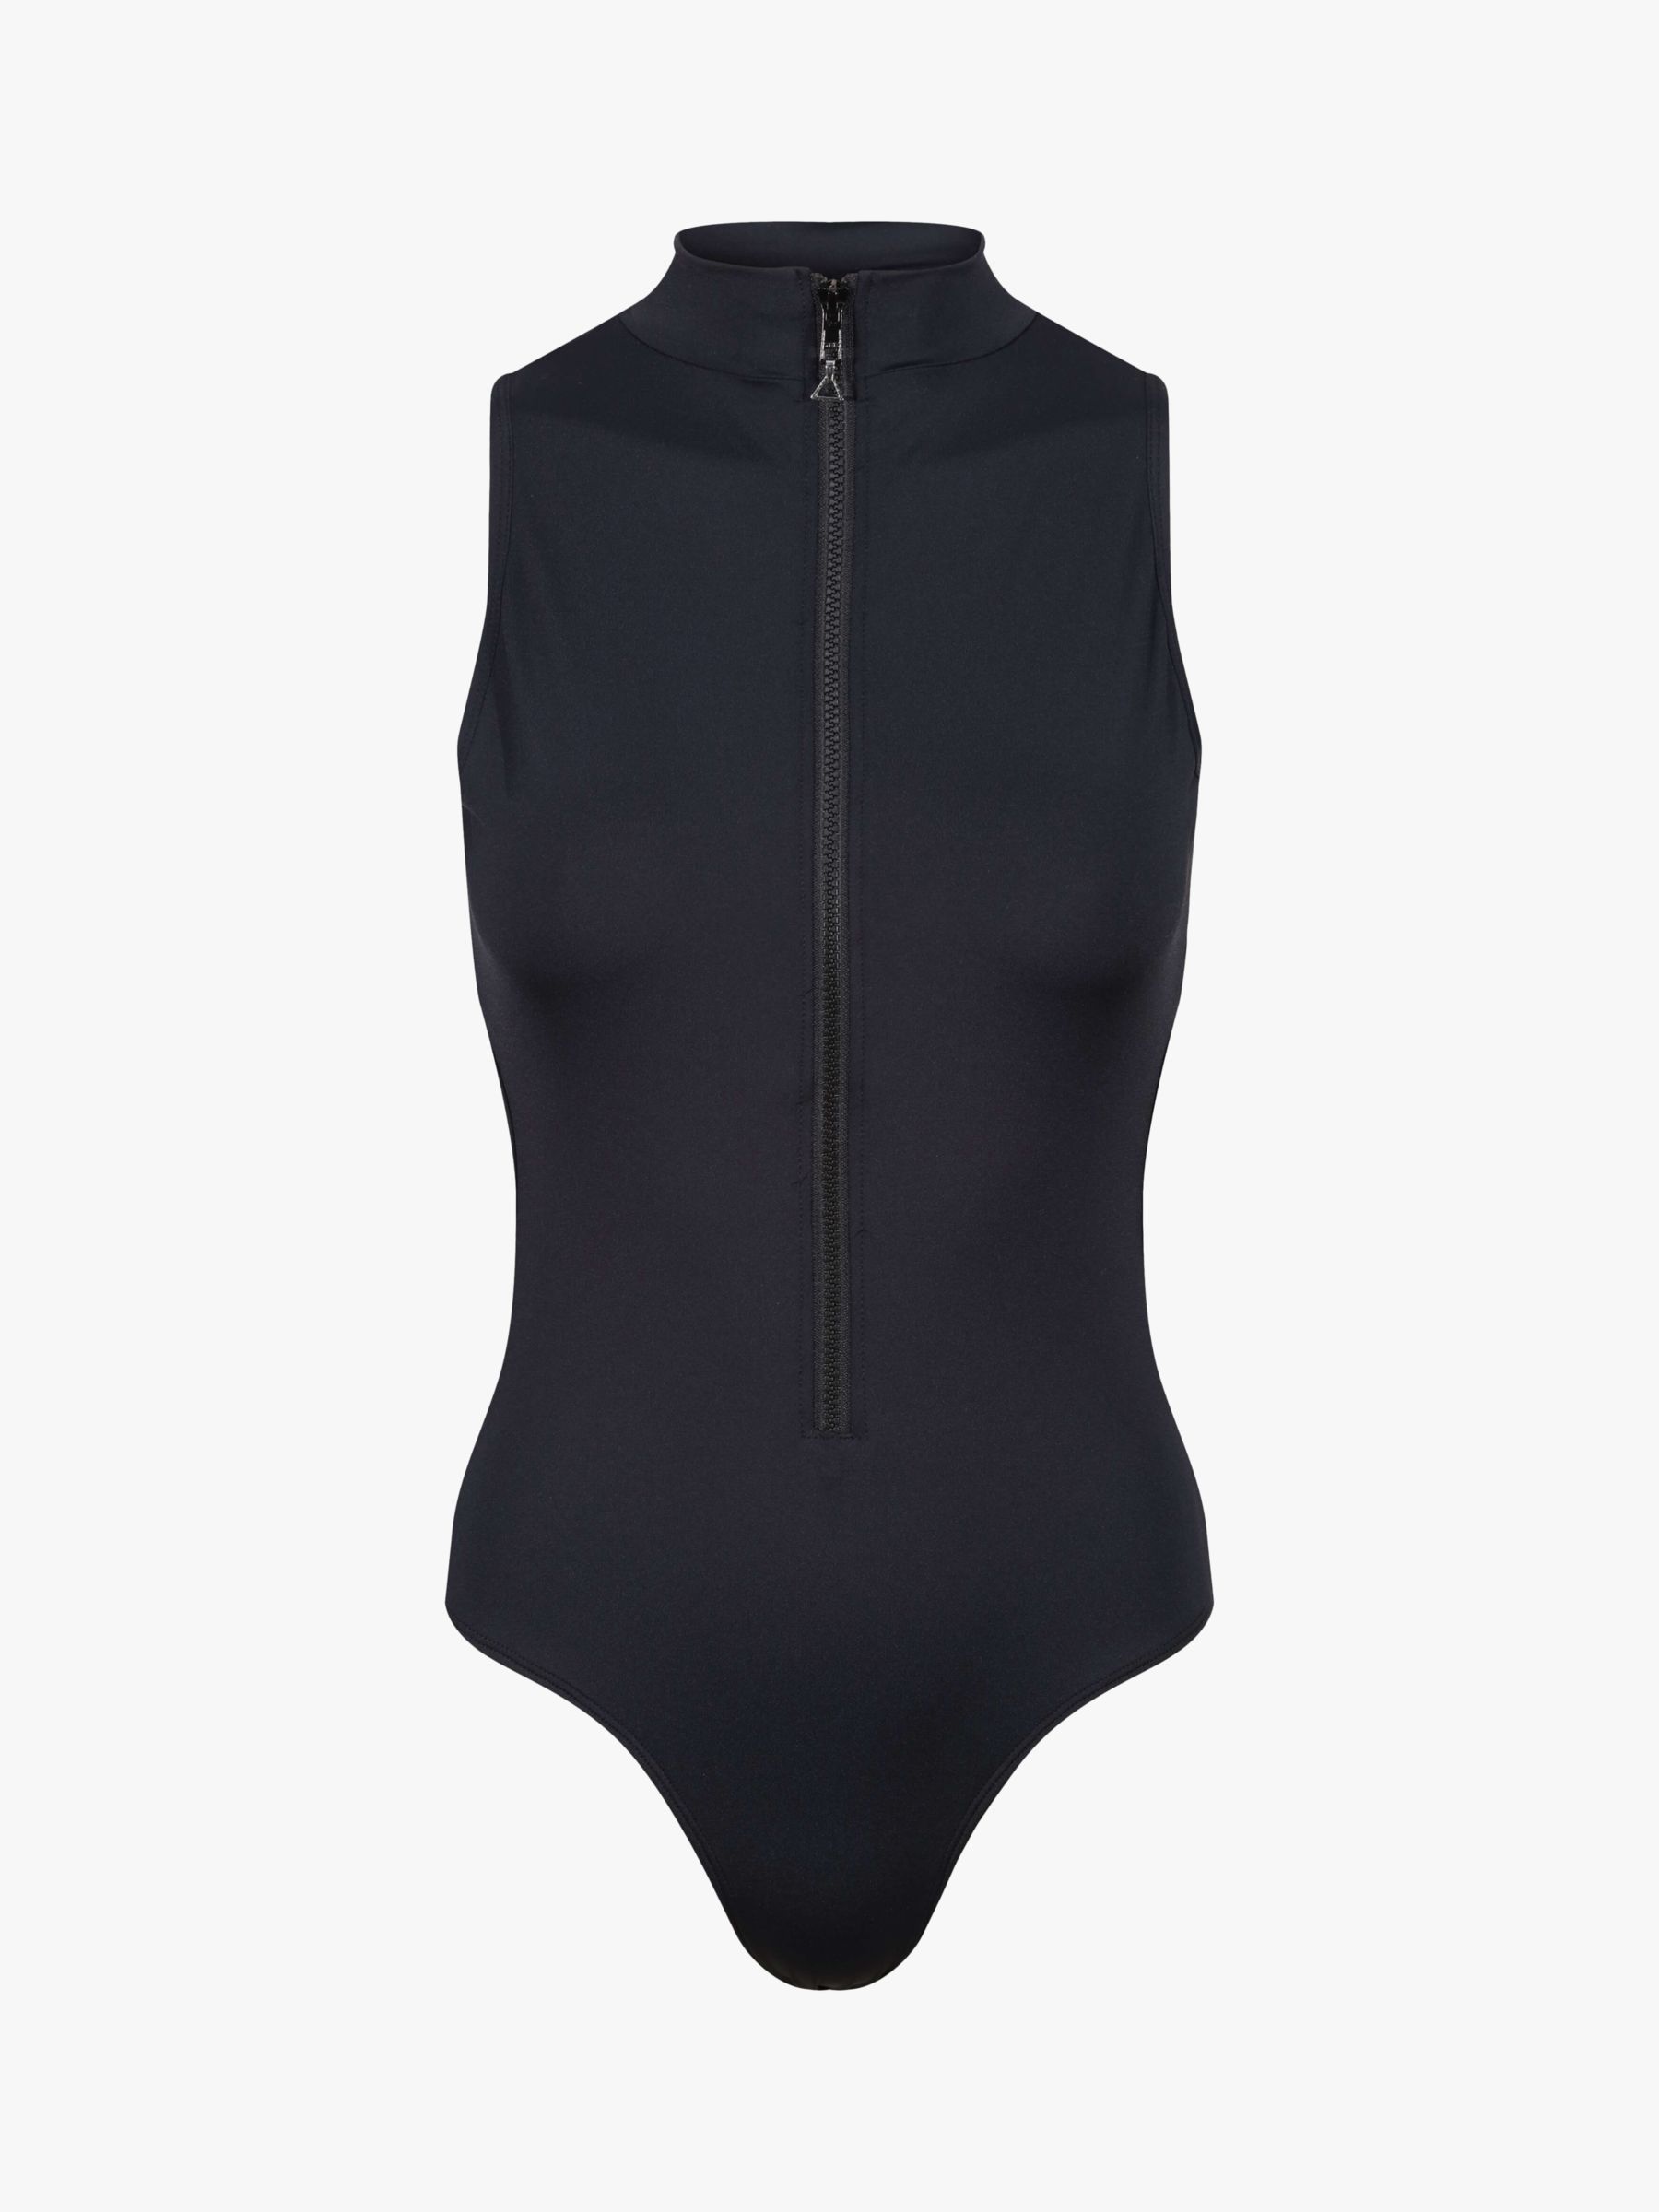 Davy J The Power Cut Out Swimsuit, Black at John Lewis & Partners